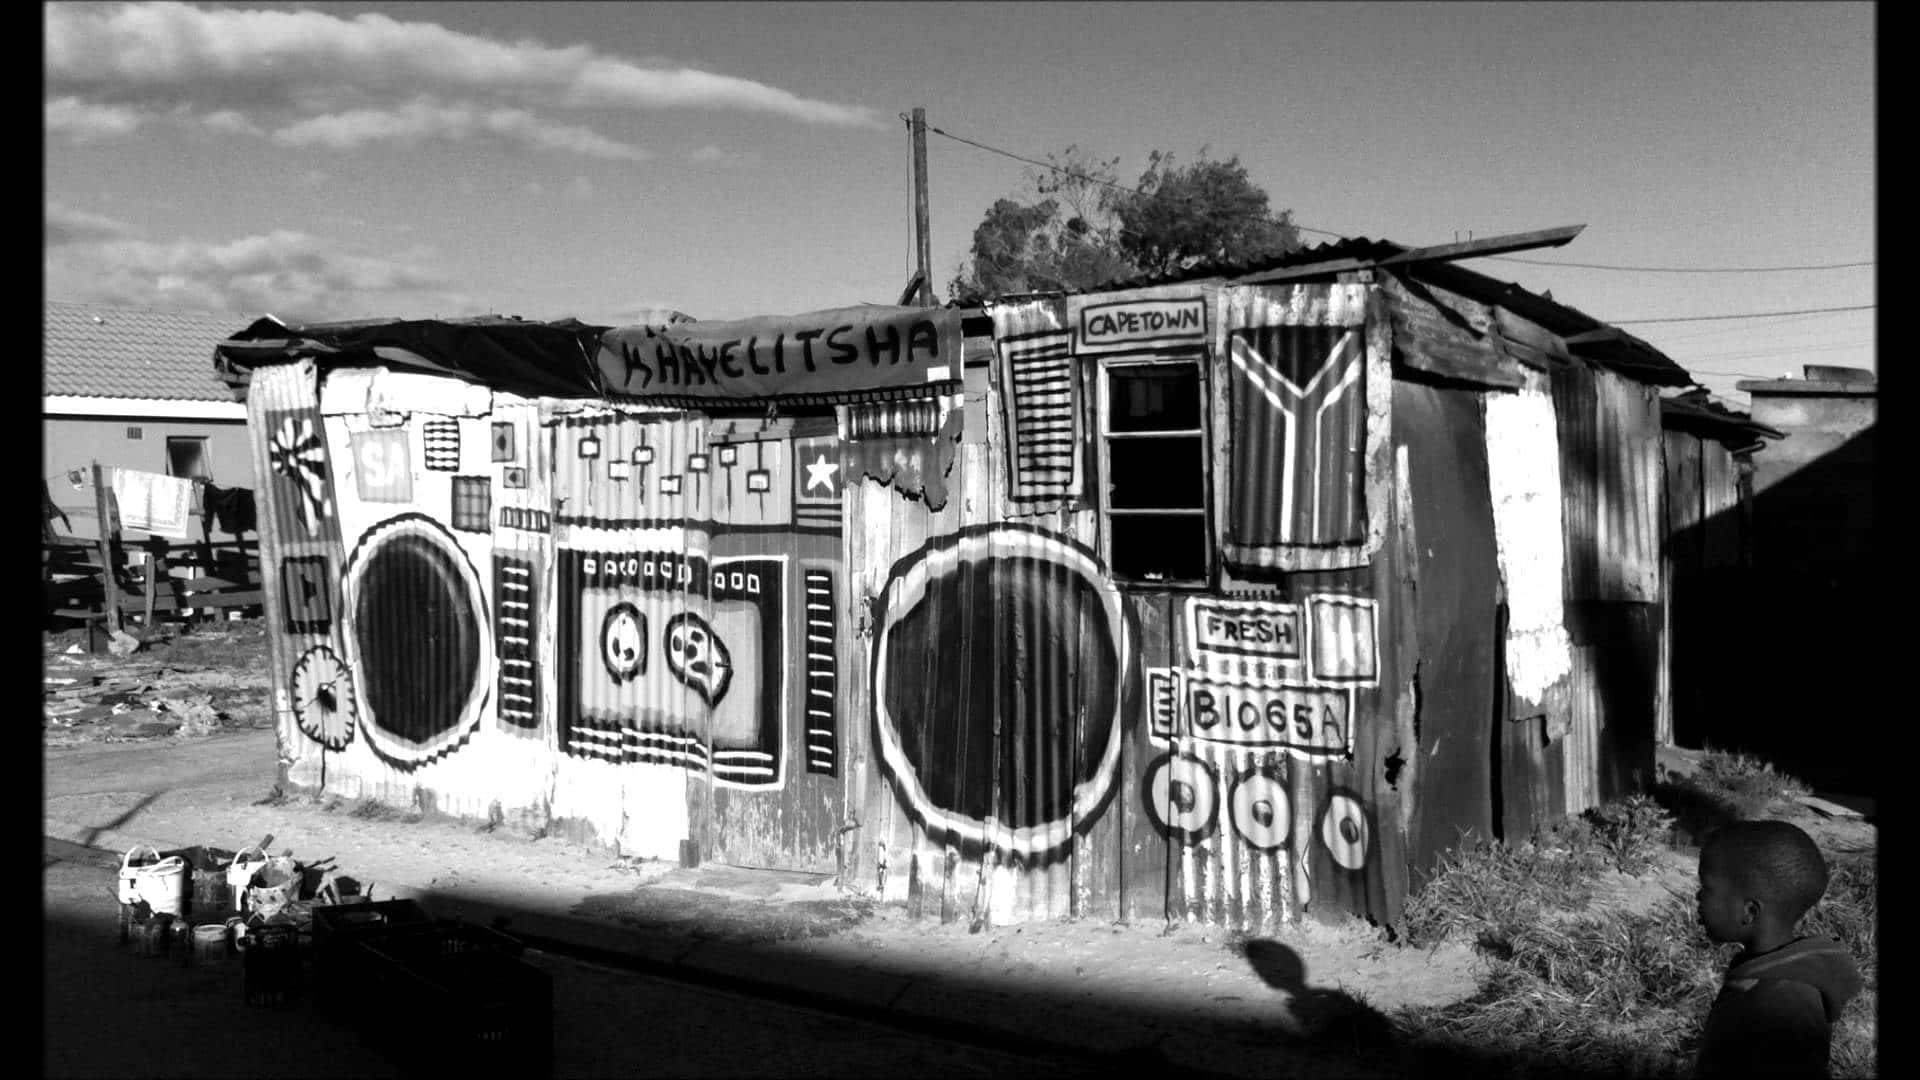 A Black And White Photo Of A Shack With Speakers Wallpaper